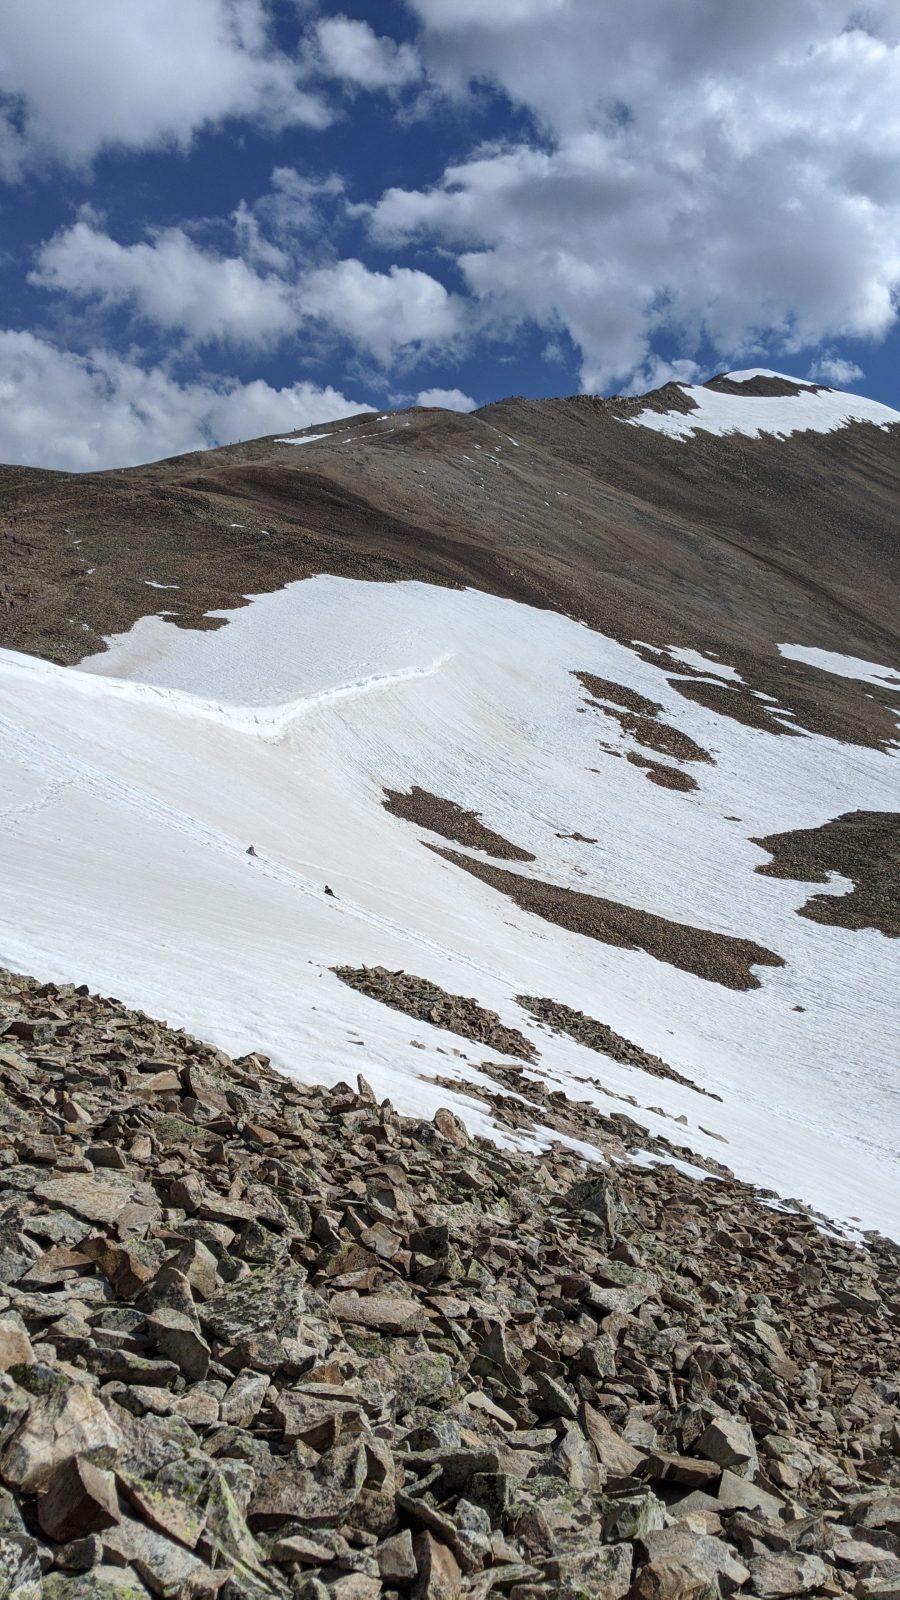 hikers climbing mount sherman in colorado in the snow